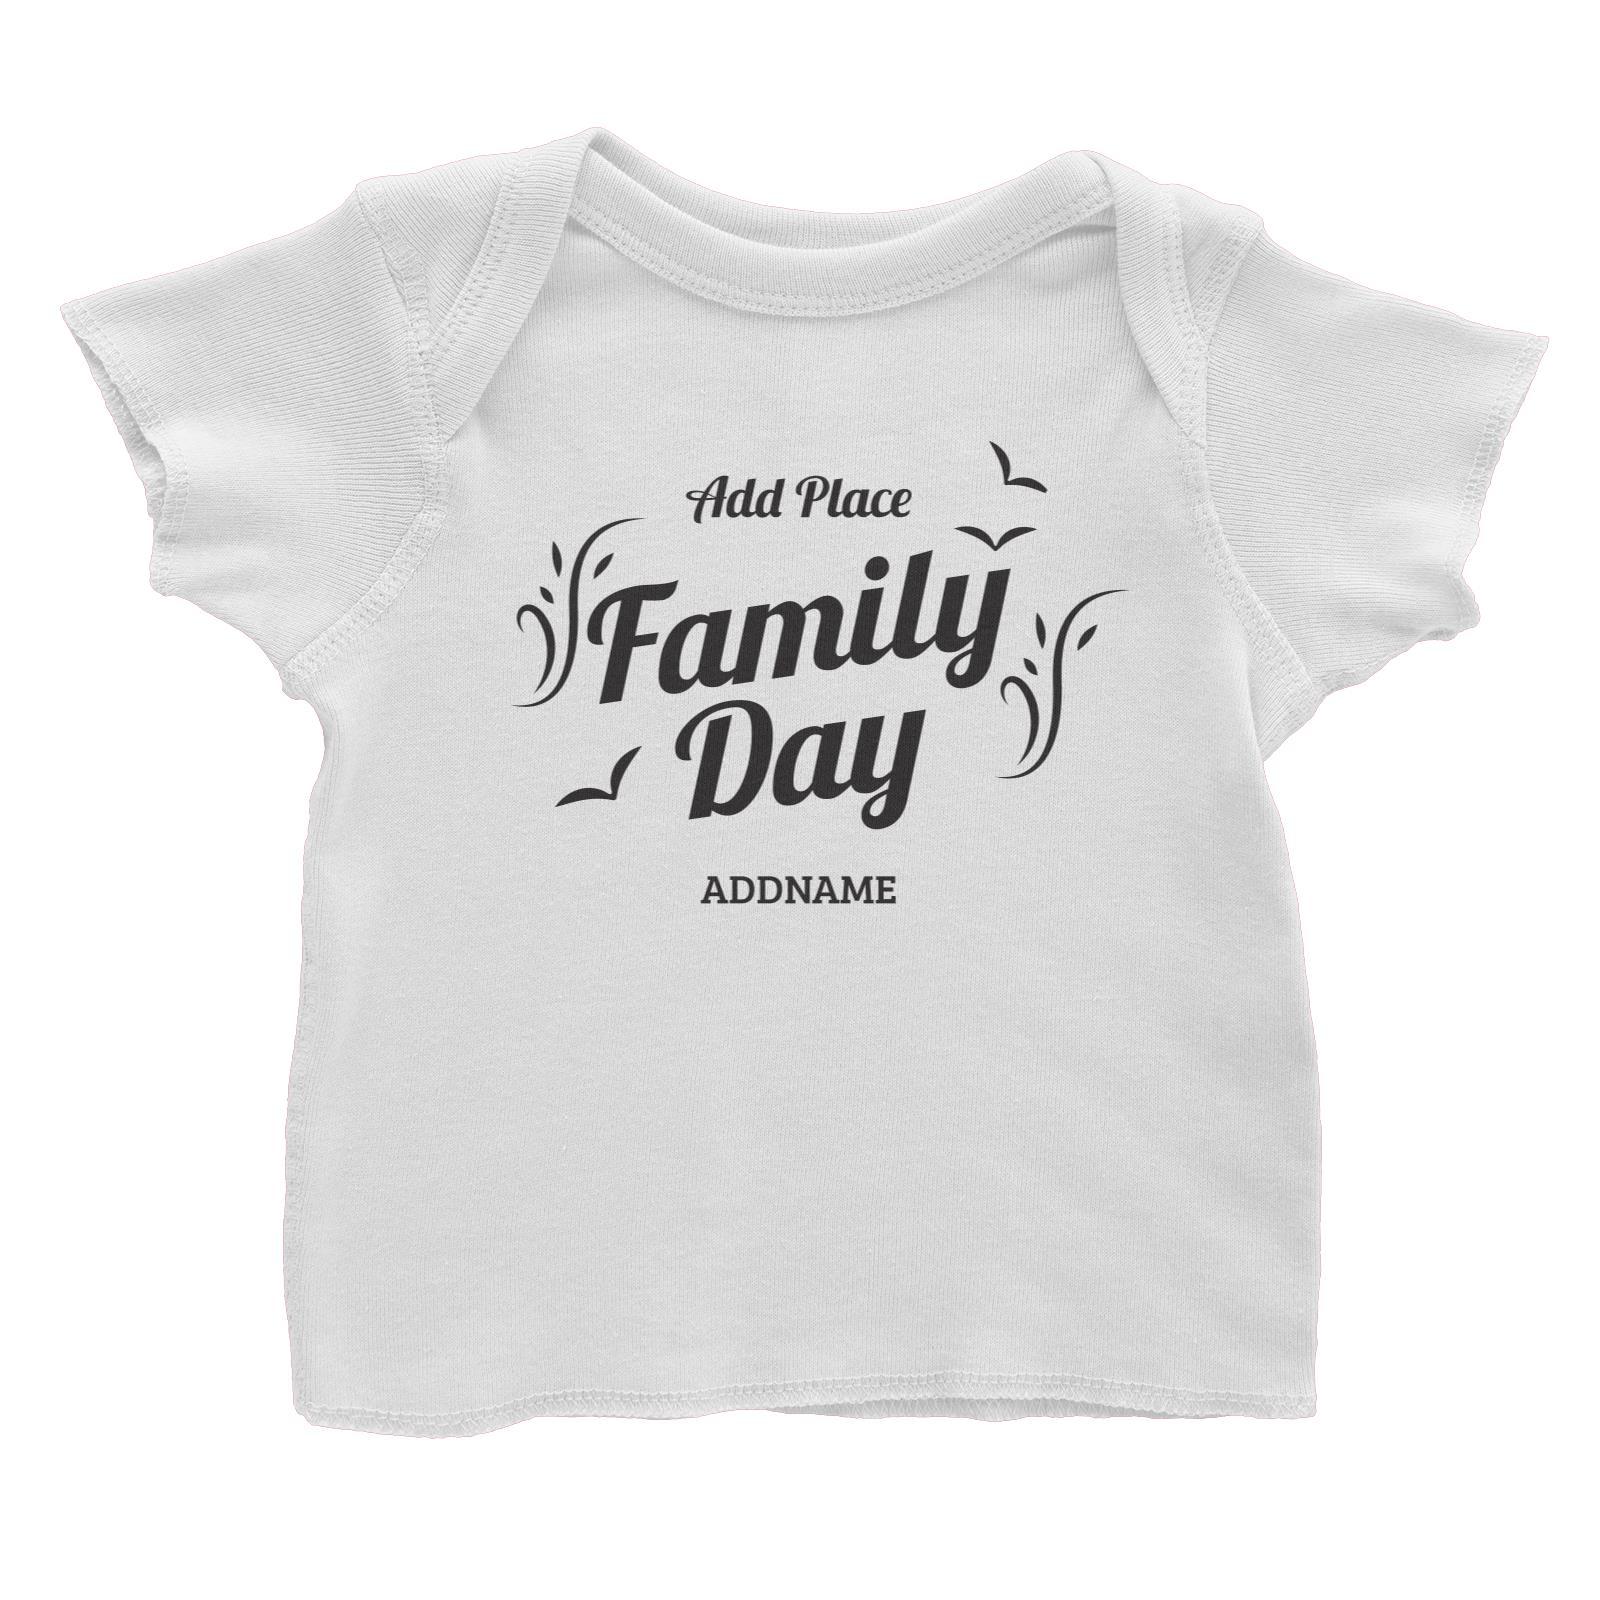 Family Day Flight Birds Icon Family Day Addname And Add Place Baby T-Shirt